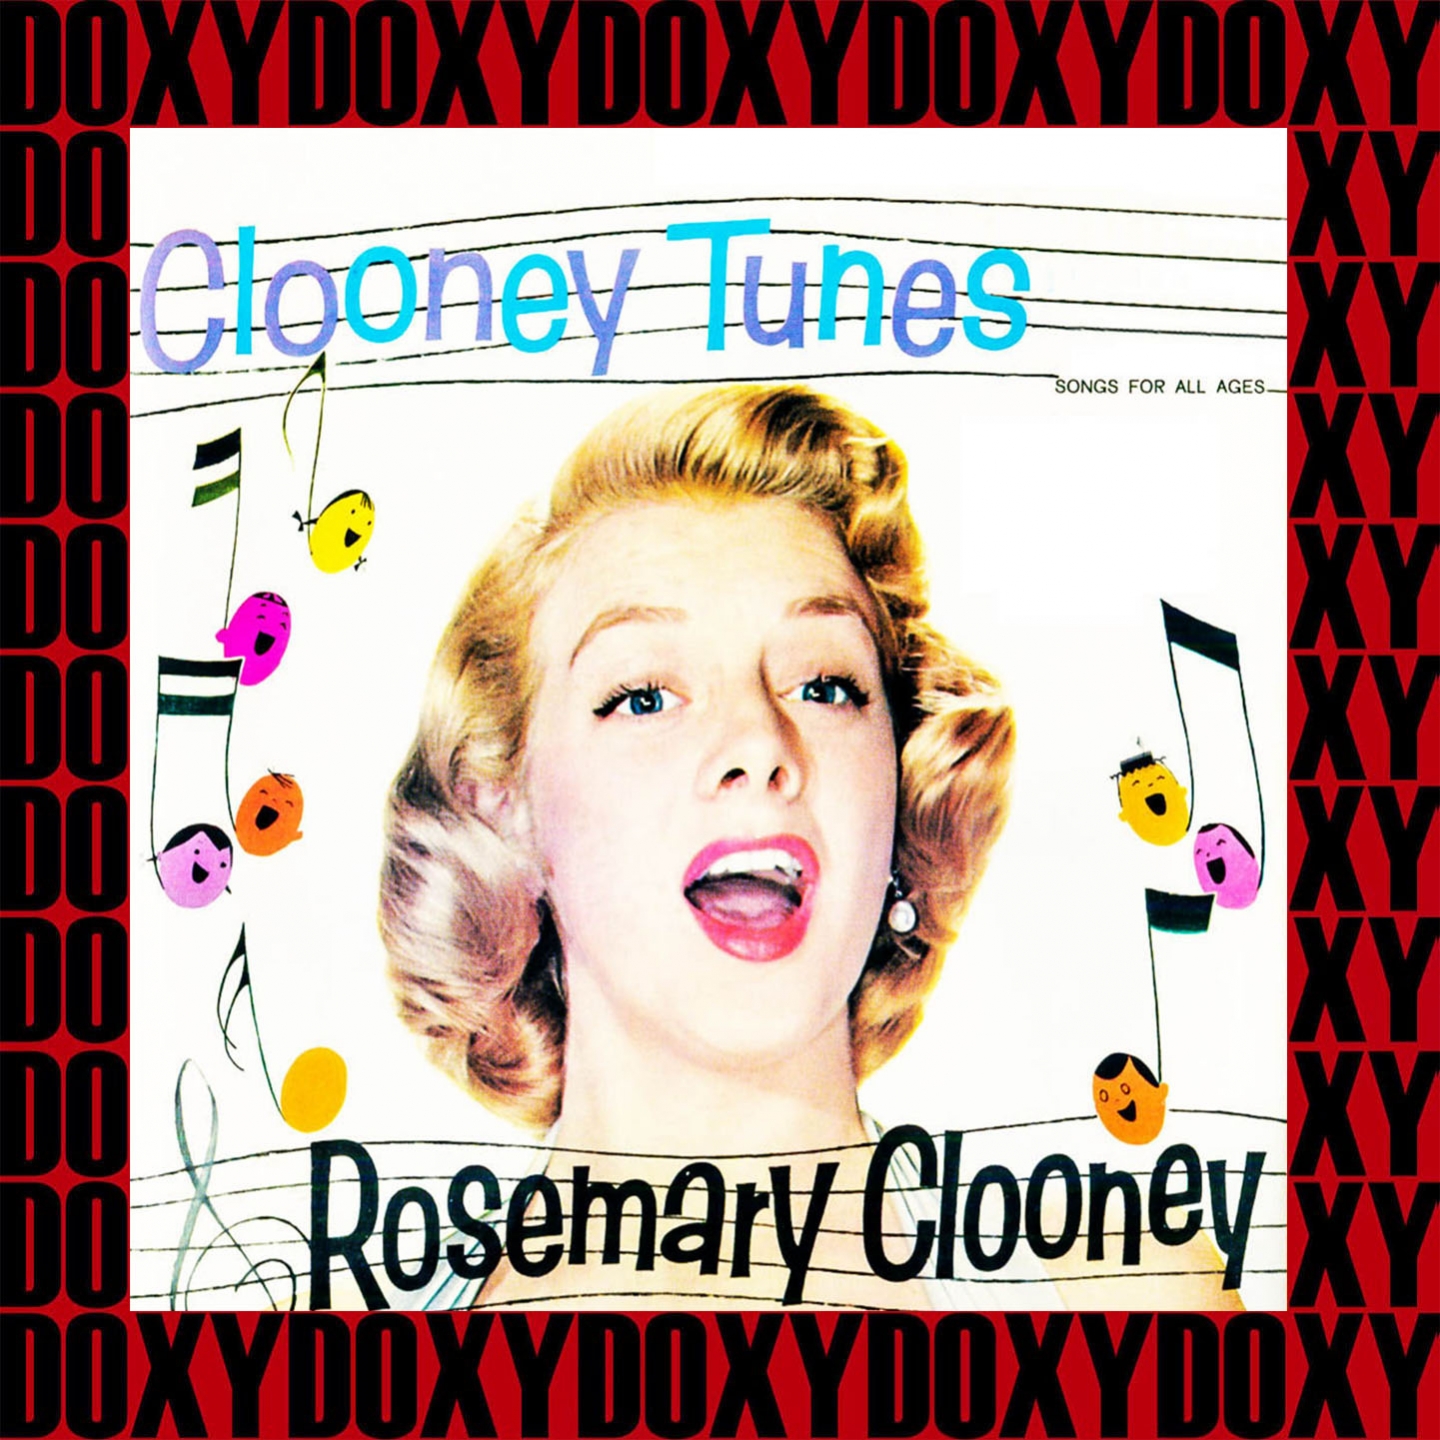 Clooney Tunes (Remastered Version) (Doxy Collection)